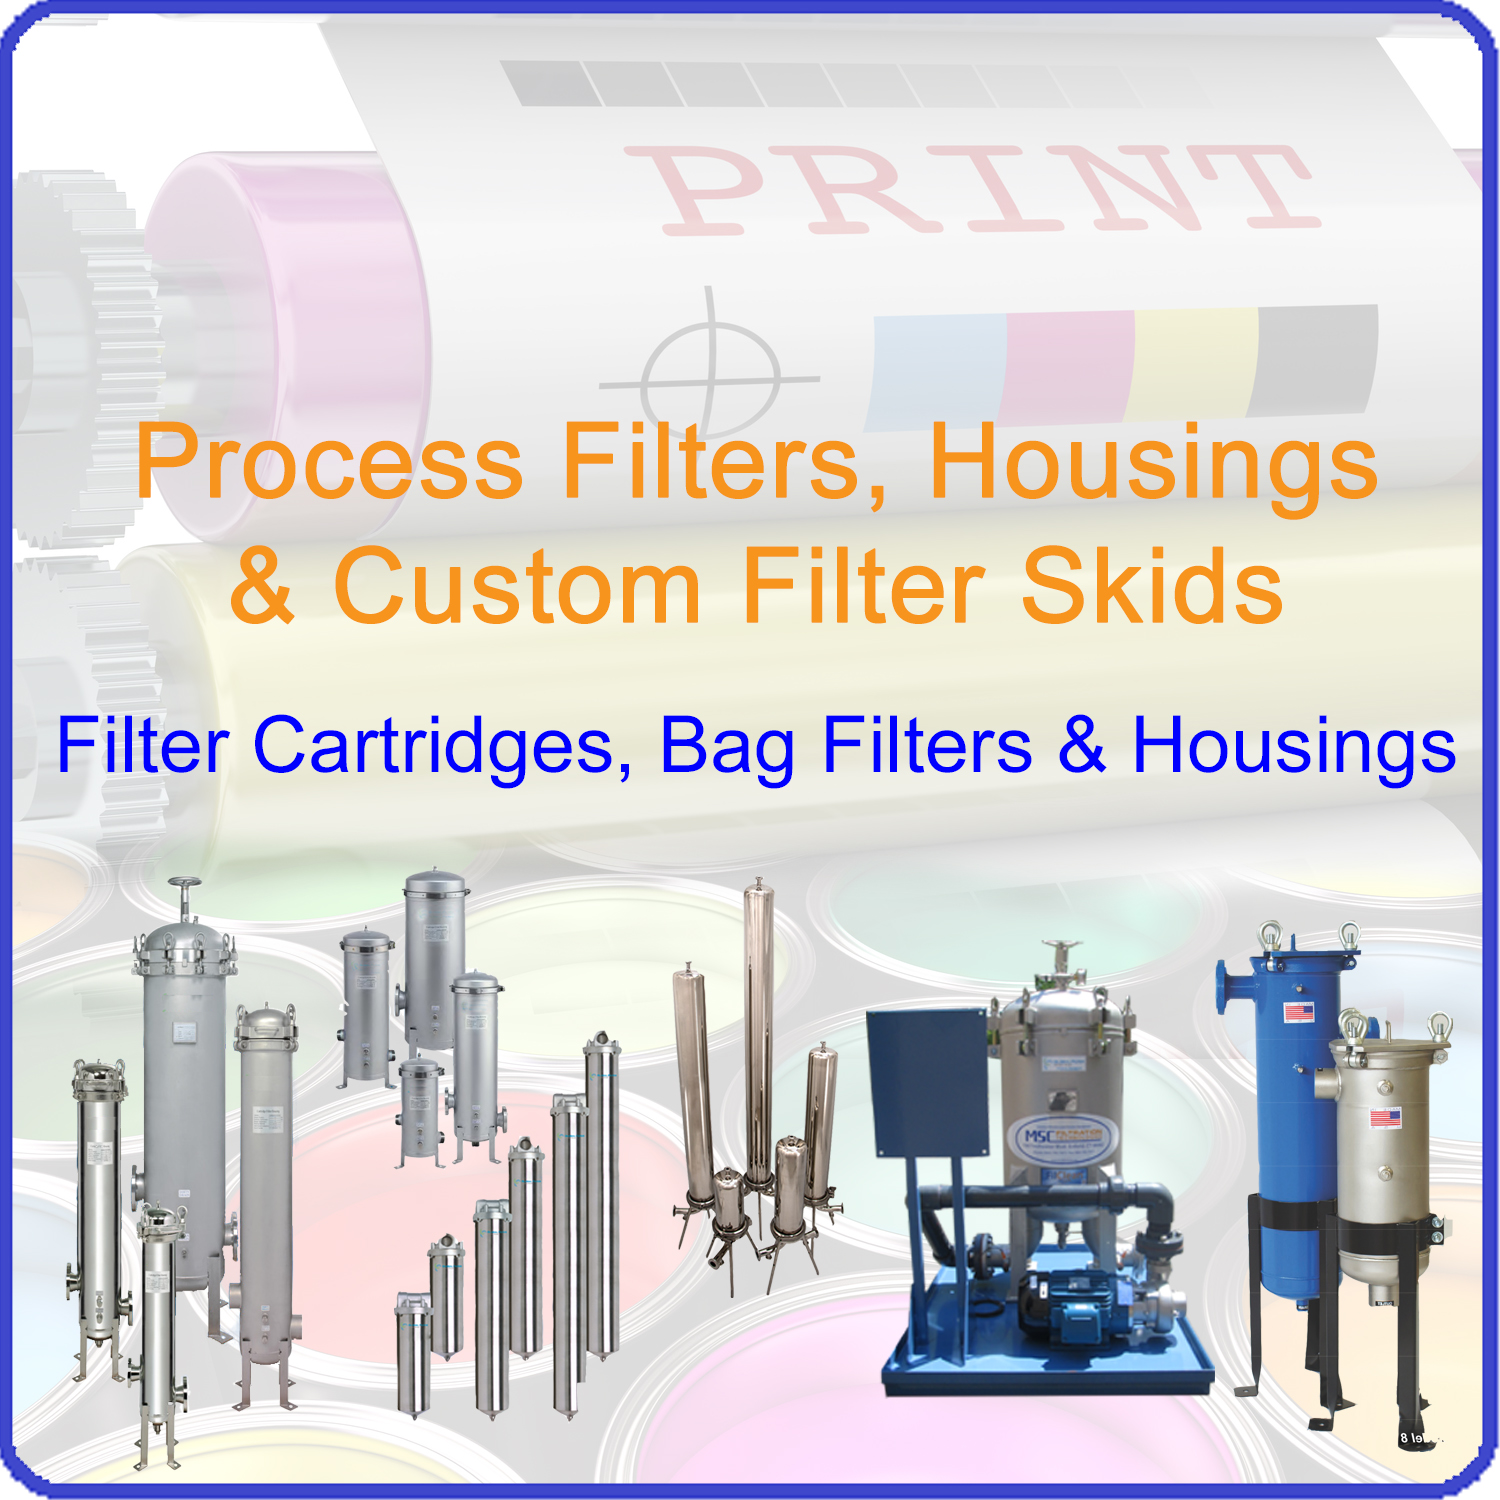 Process Filtration Systems